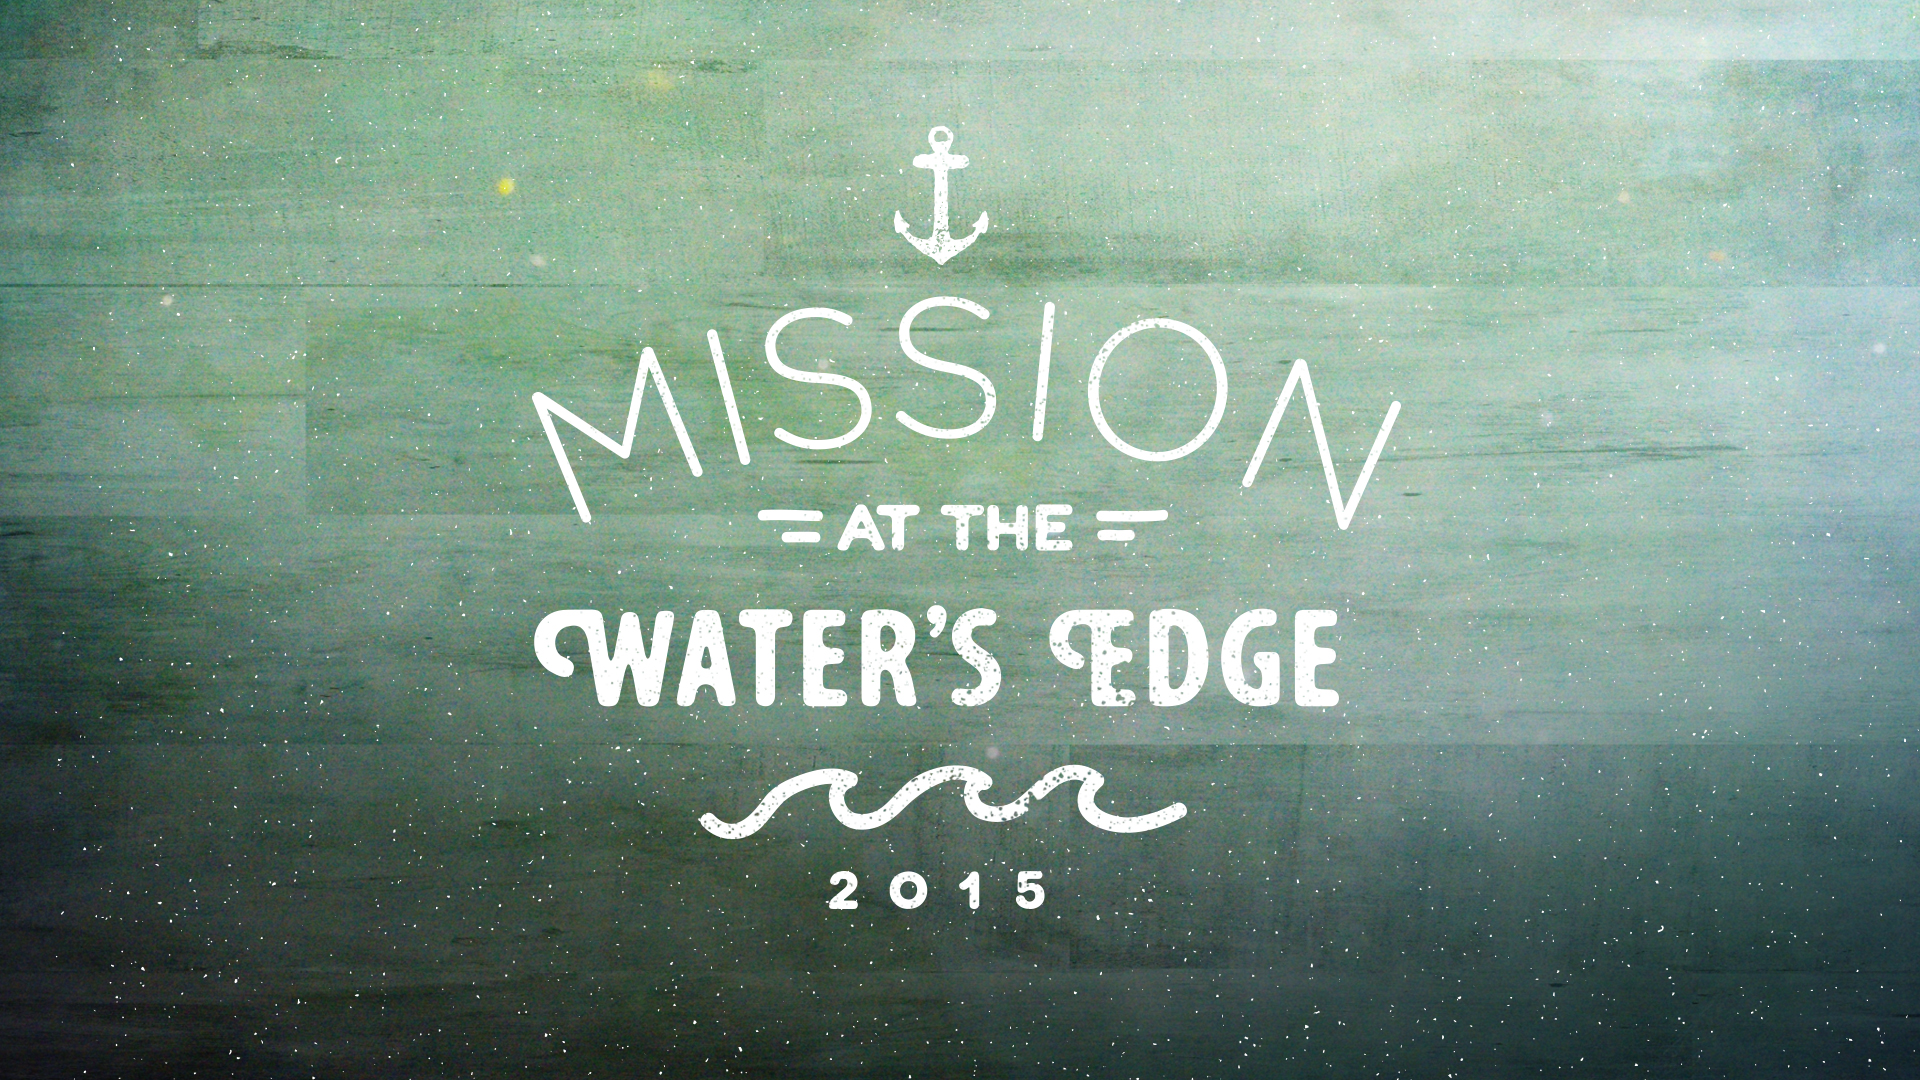  Mission at the Water's Edge